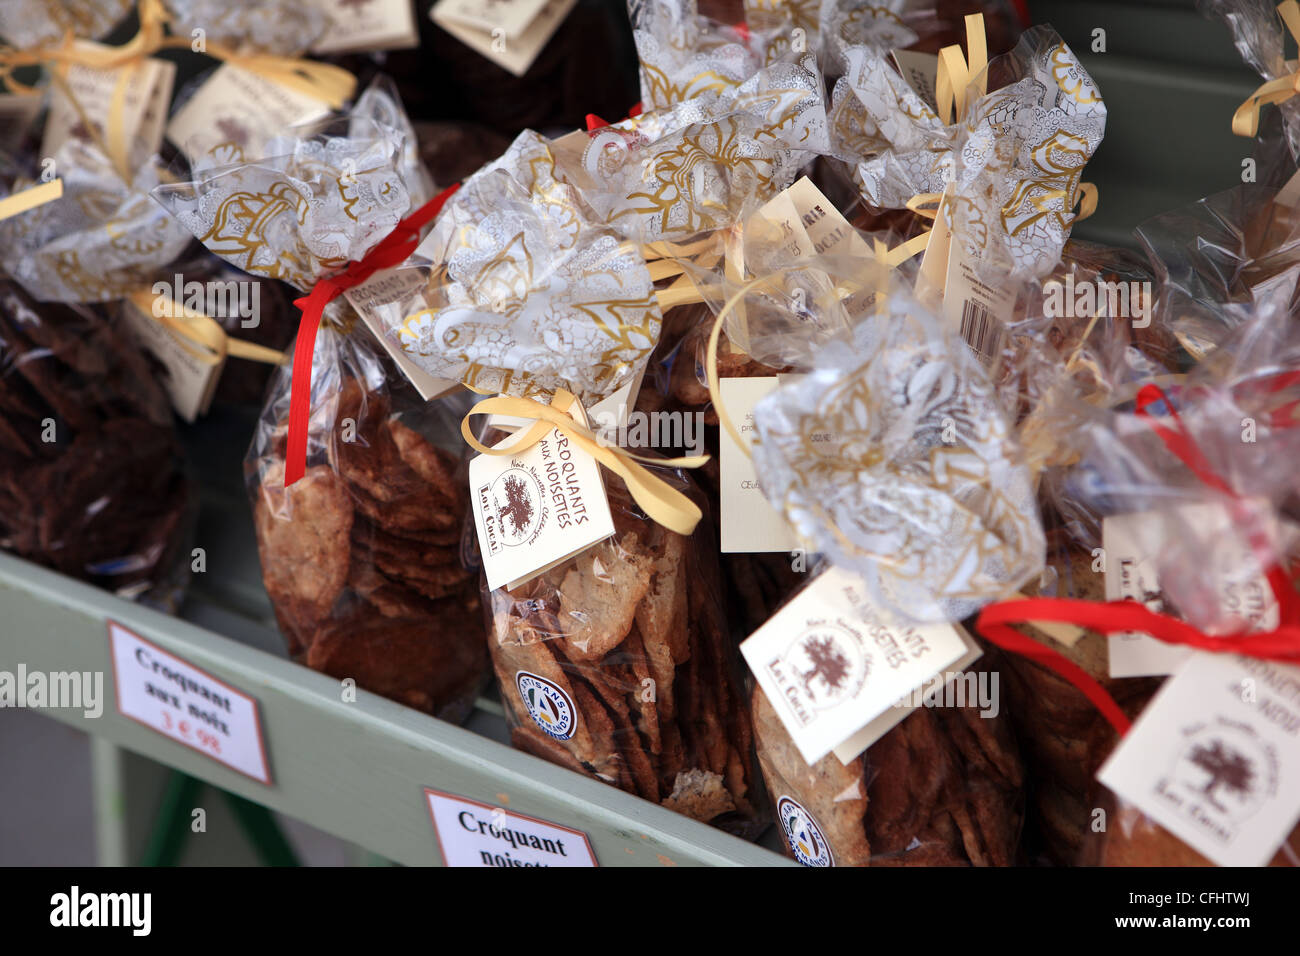 Croquants aux noisettes or crunchy hazelnuts a speciality of Bordeaux on sale in a market in France Stock Photo